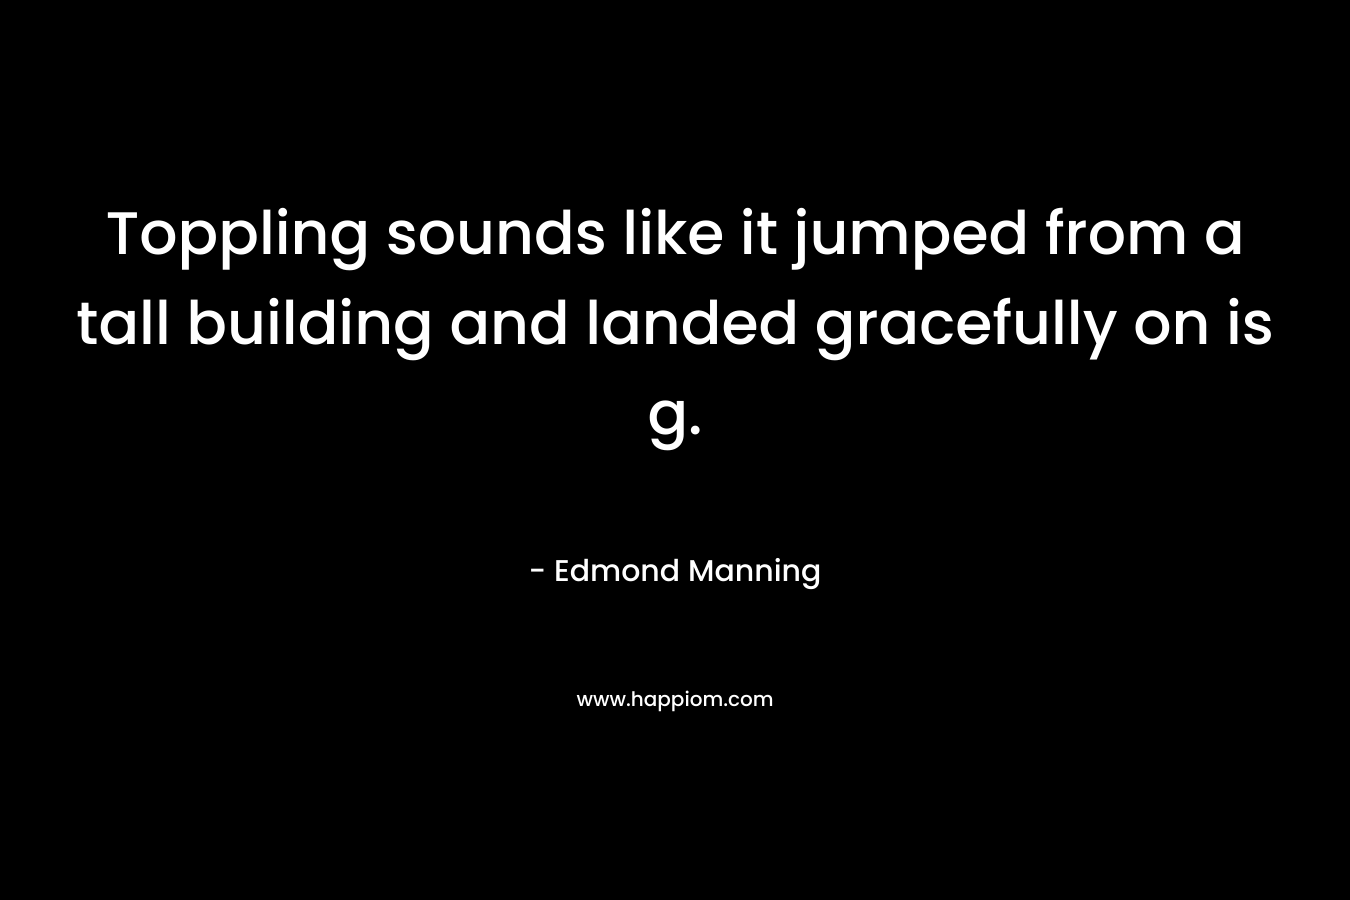 Toppling sounds like it jumped from a tall building and landed gracefully on is g. – Edmond Manning